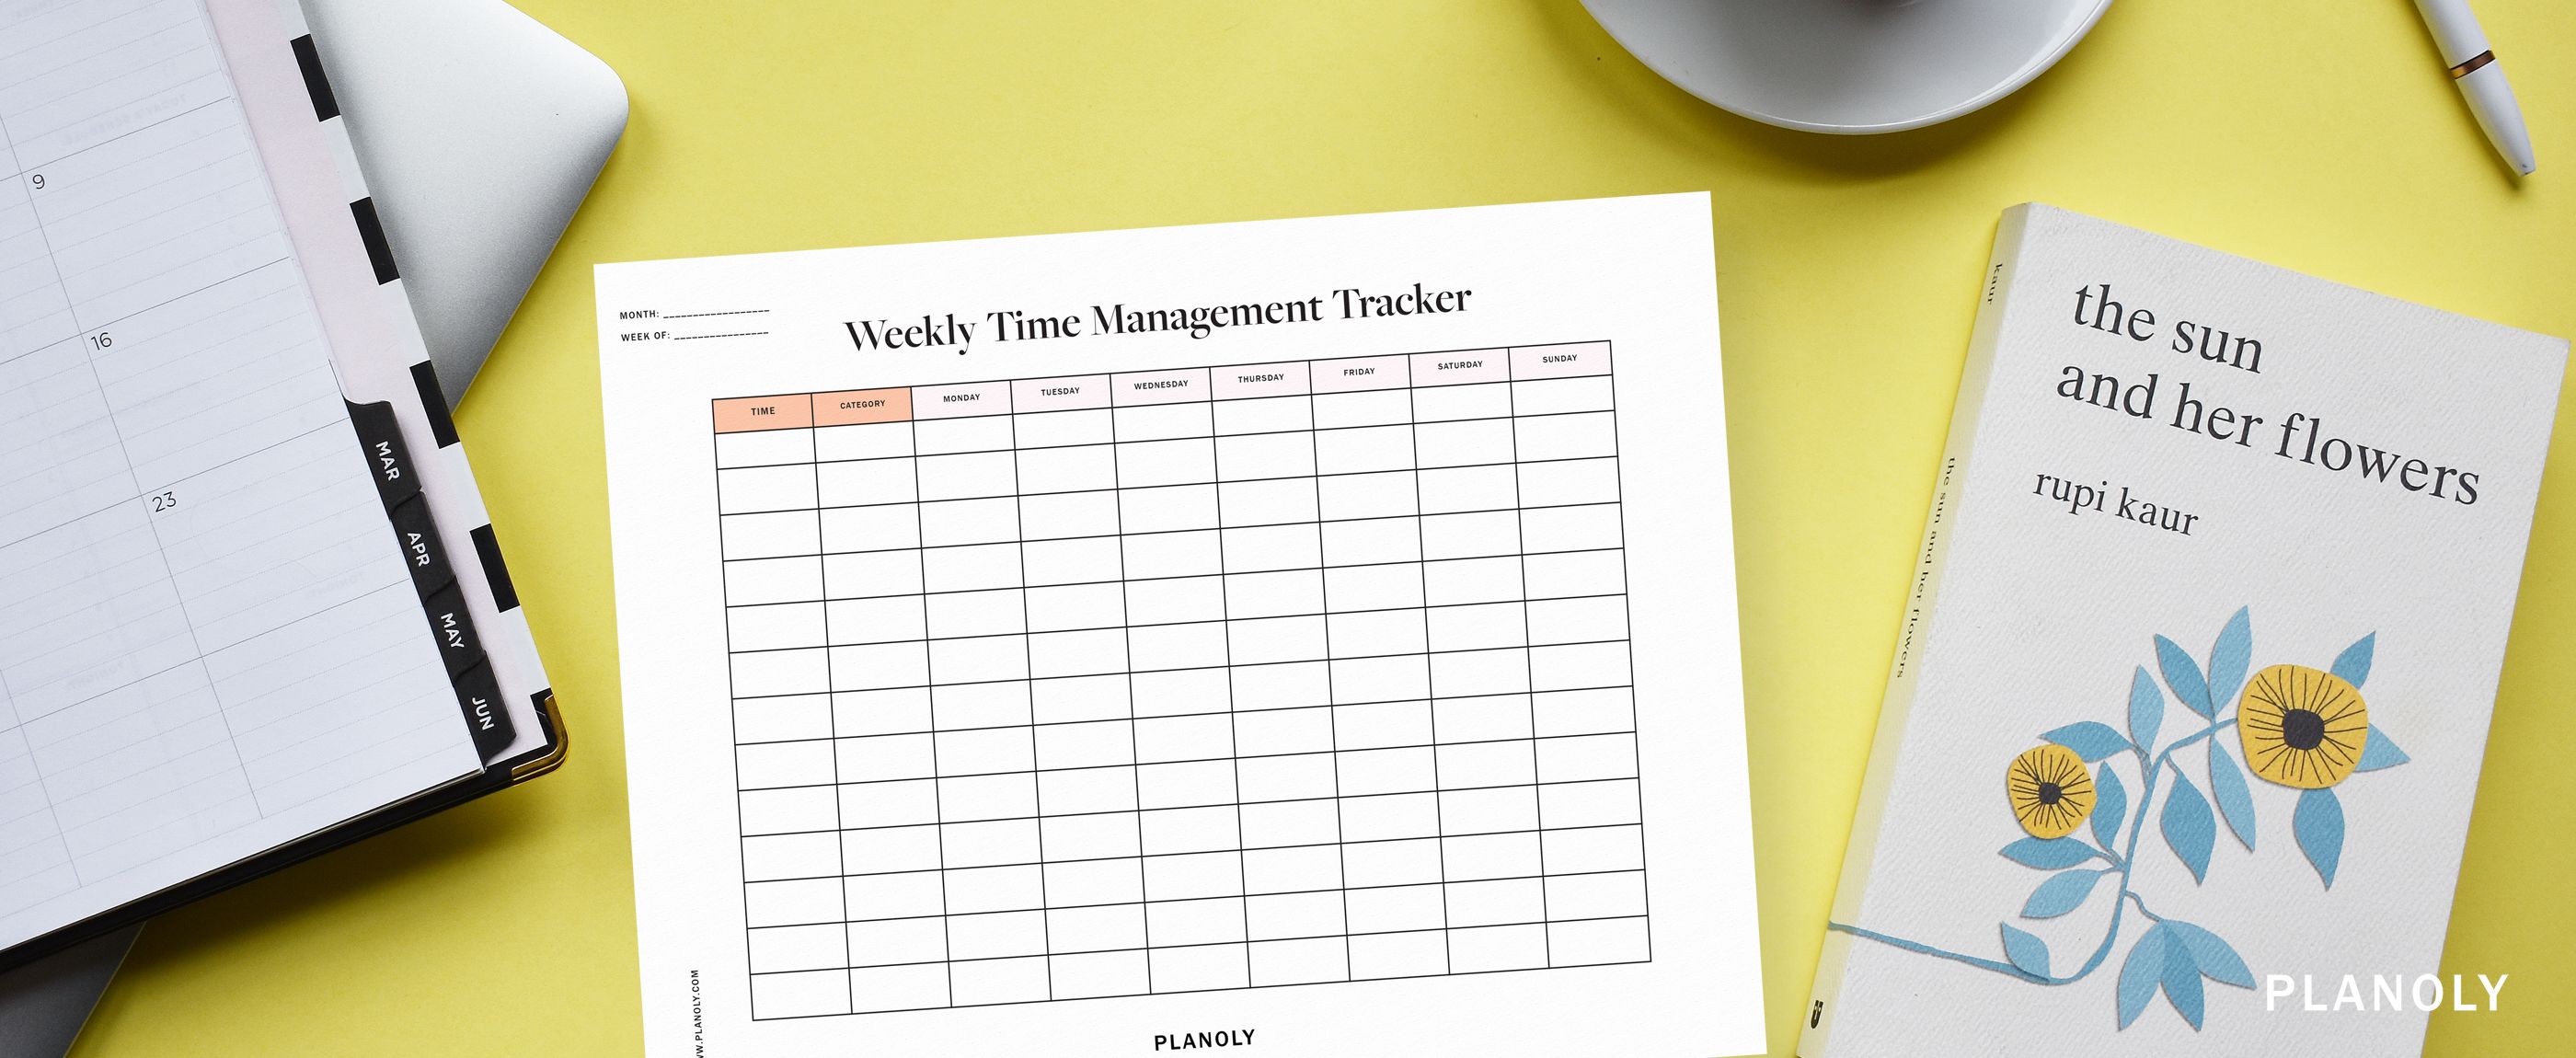 How to Manage Your Time Better